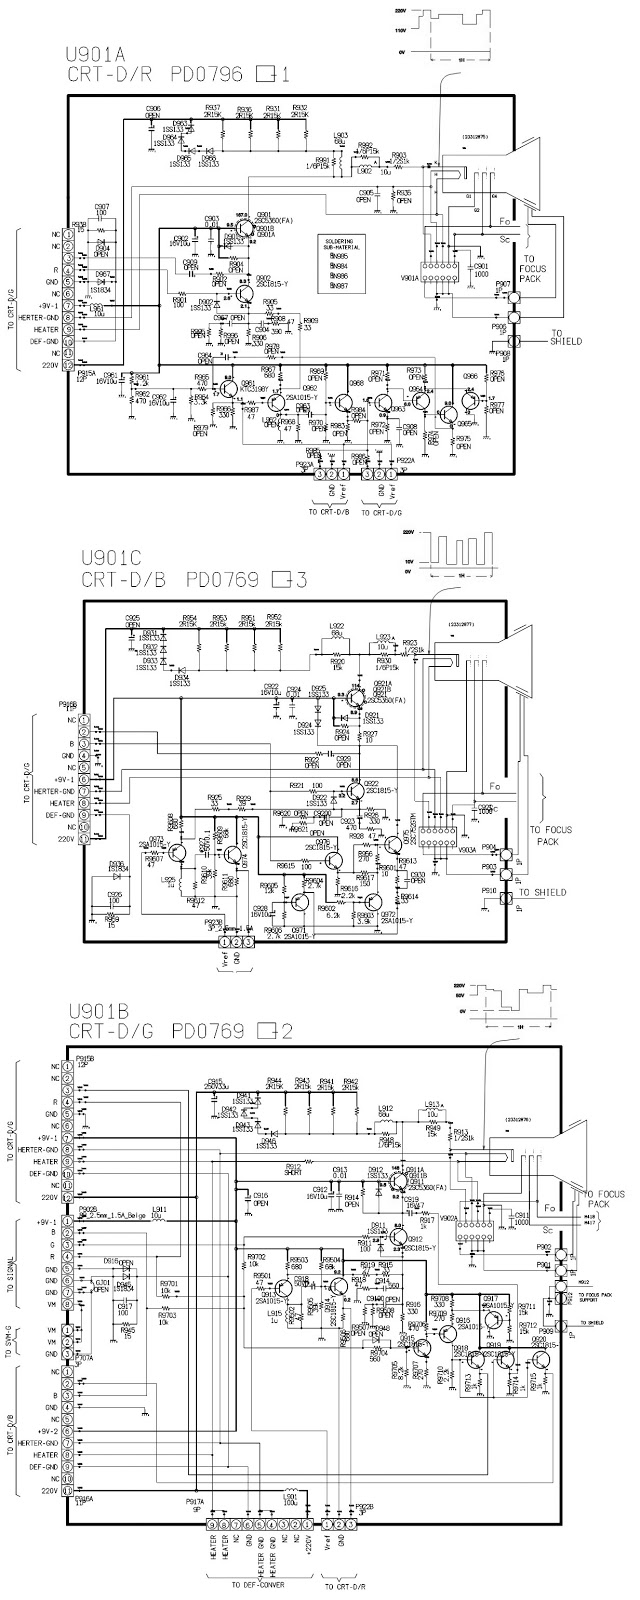 TOSHIBA 50 inch PROJECTION TV - SMPS SCHEMATIC